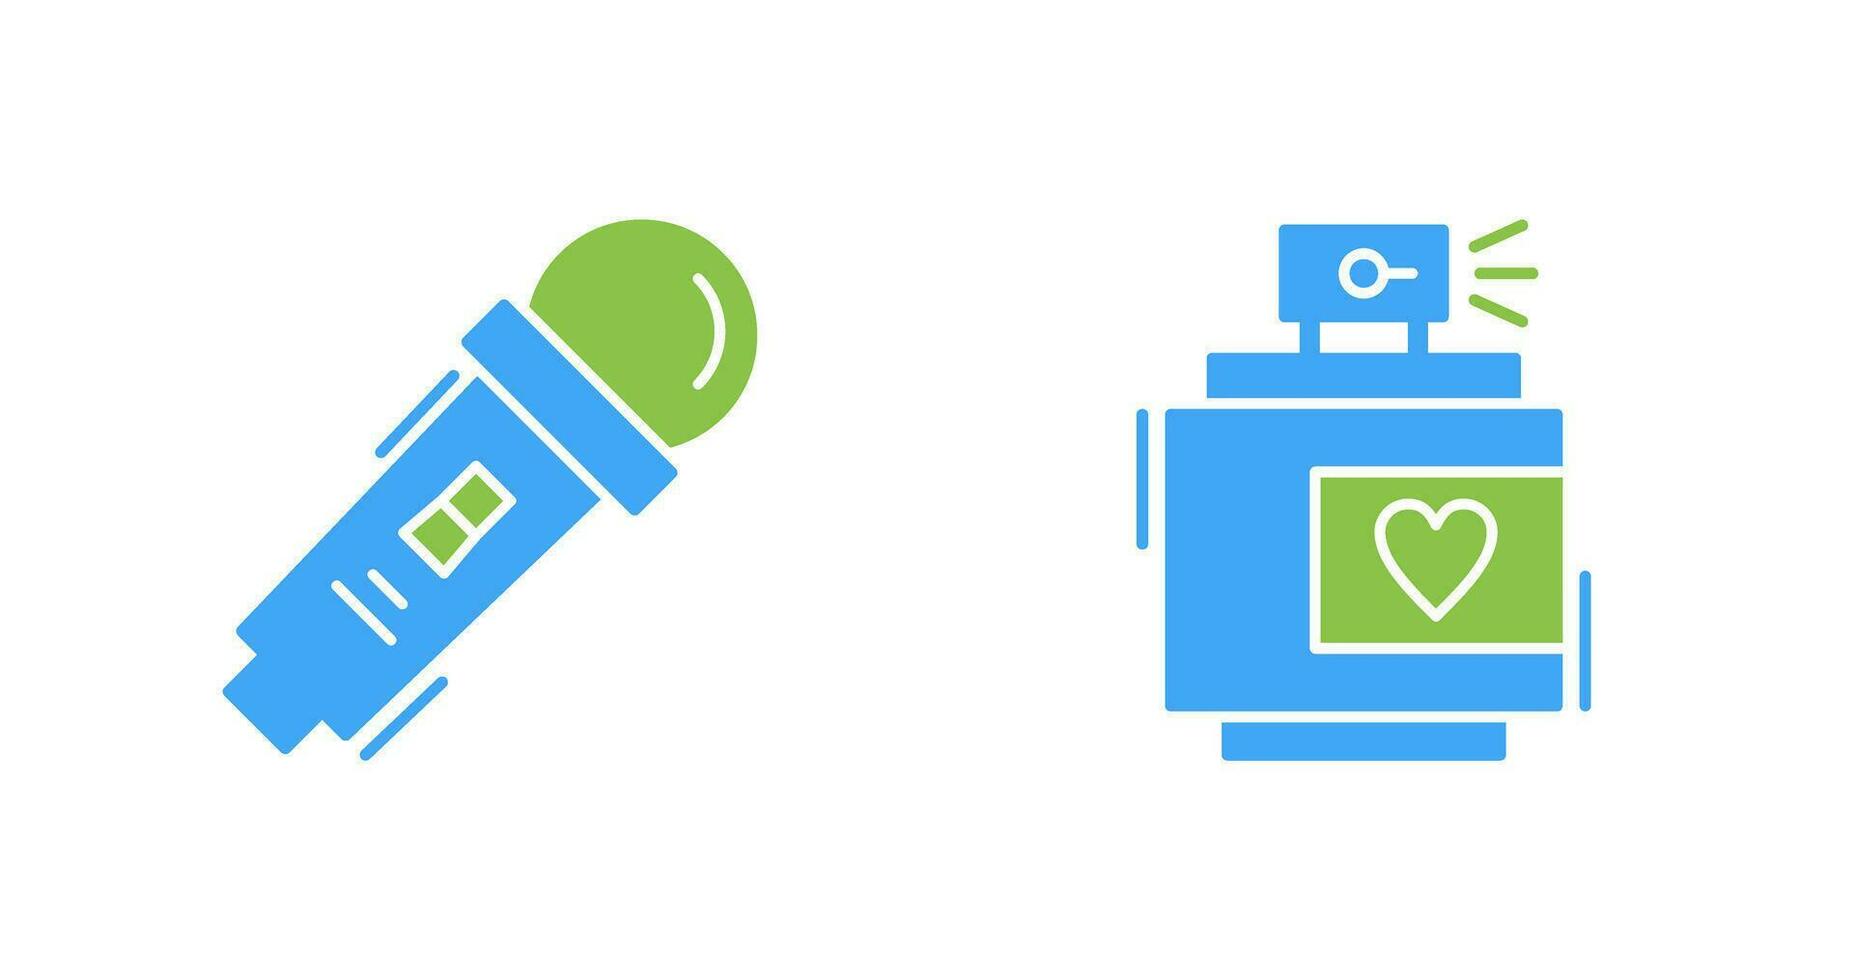 Microphone and Perfume Icon vector